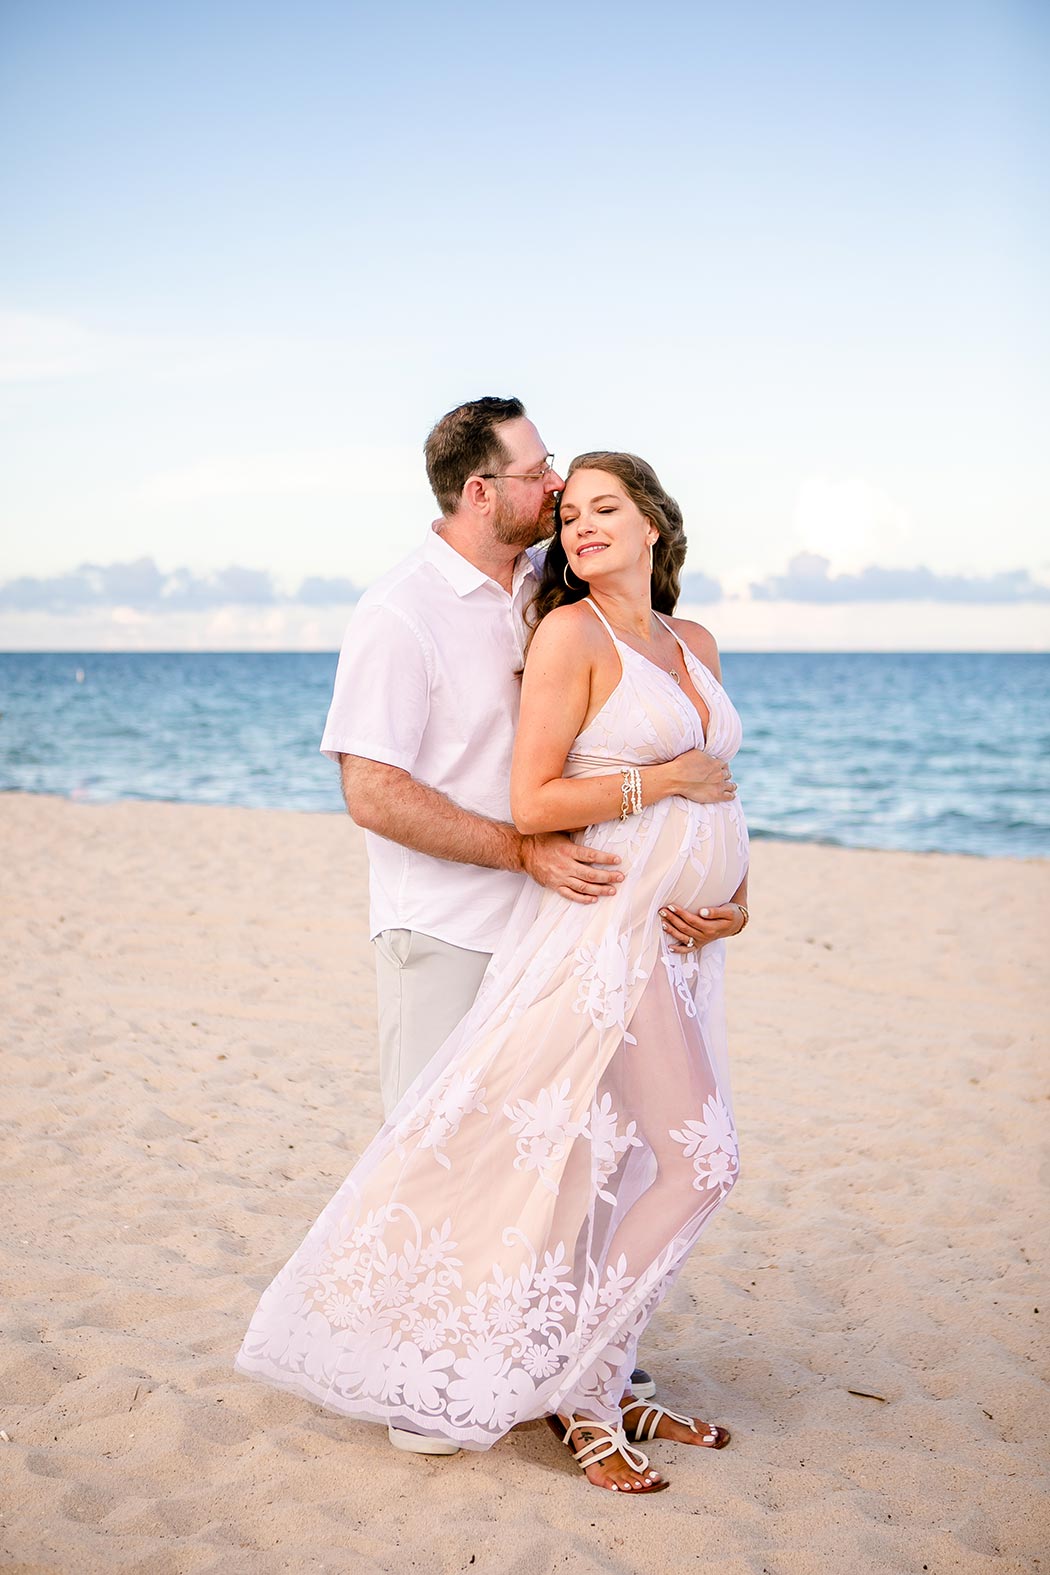 couple posing on beach in fort lauderdale for maternity photoshoot | maternity photographer fort lauderdale | fort lauderdale maternity photoshoot